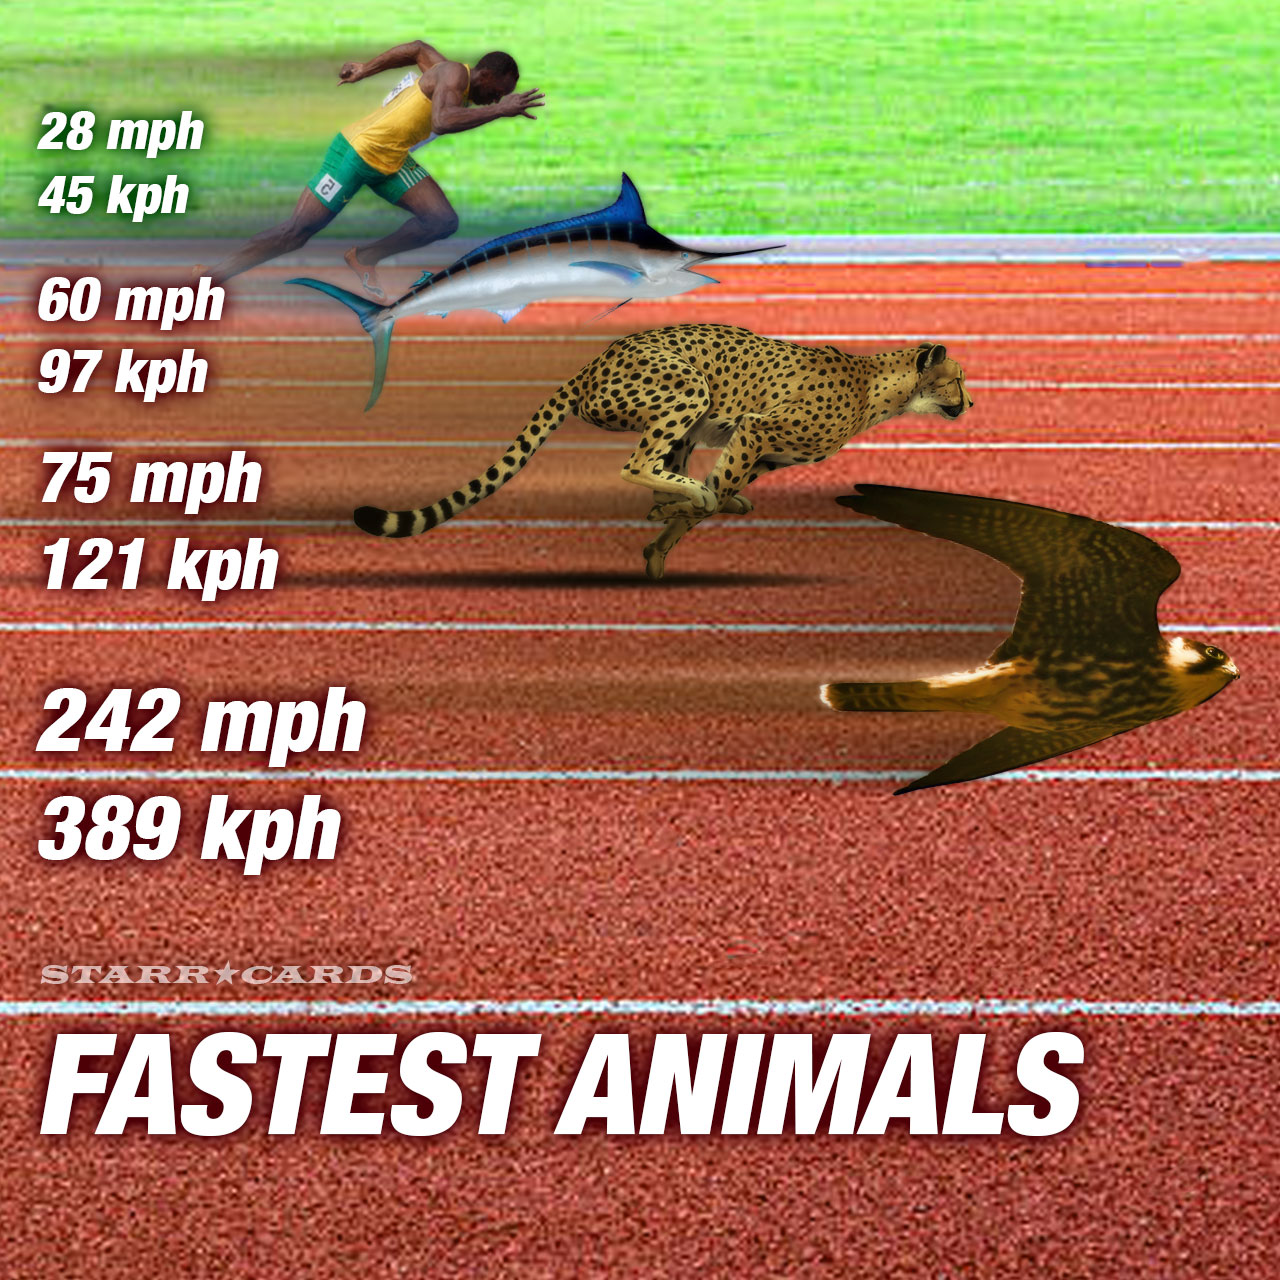 World's fastest animals easily outrace Usain Bolt in 100-meter dash